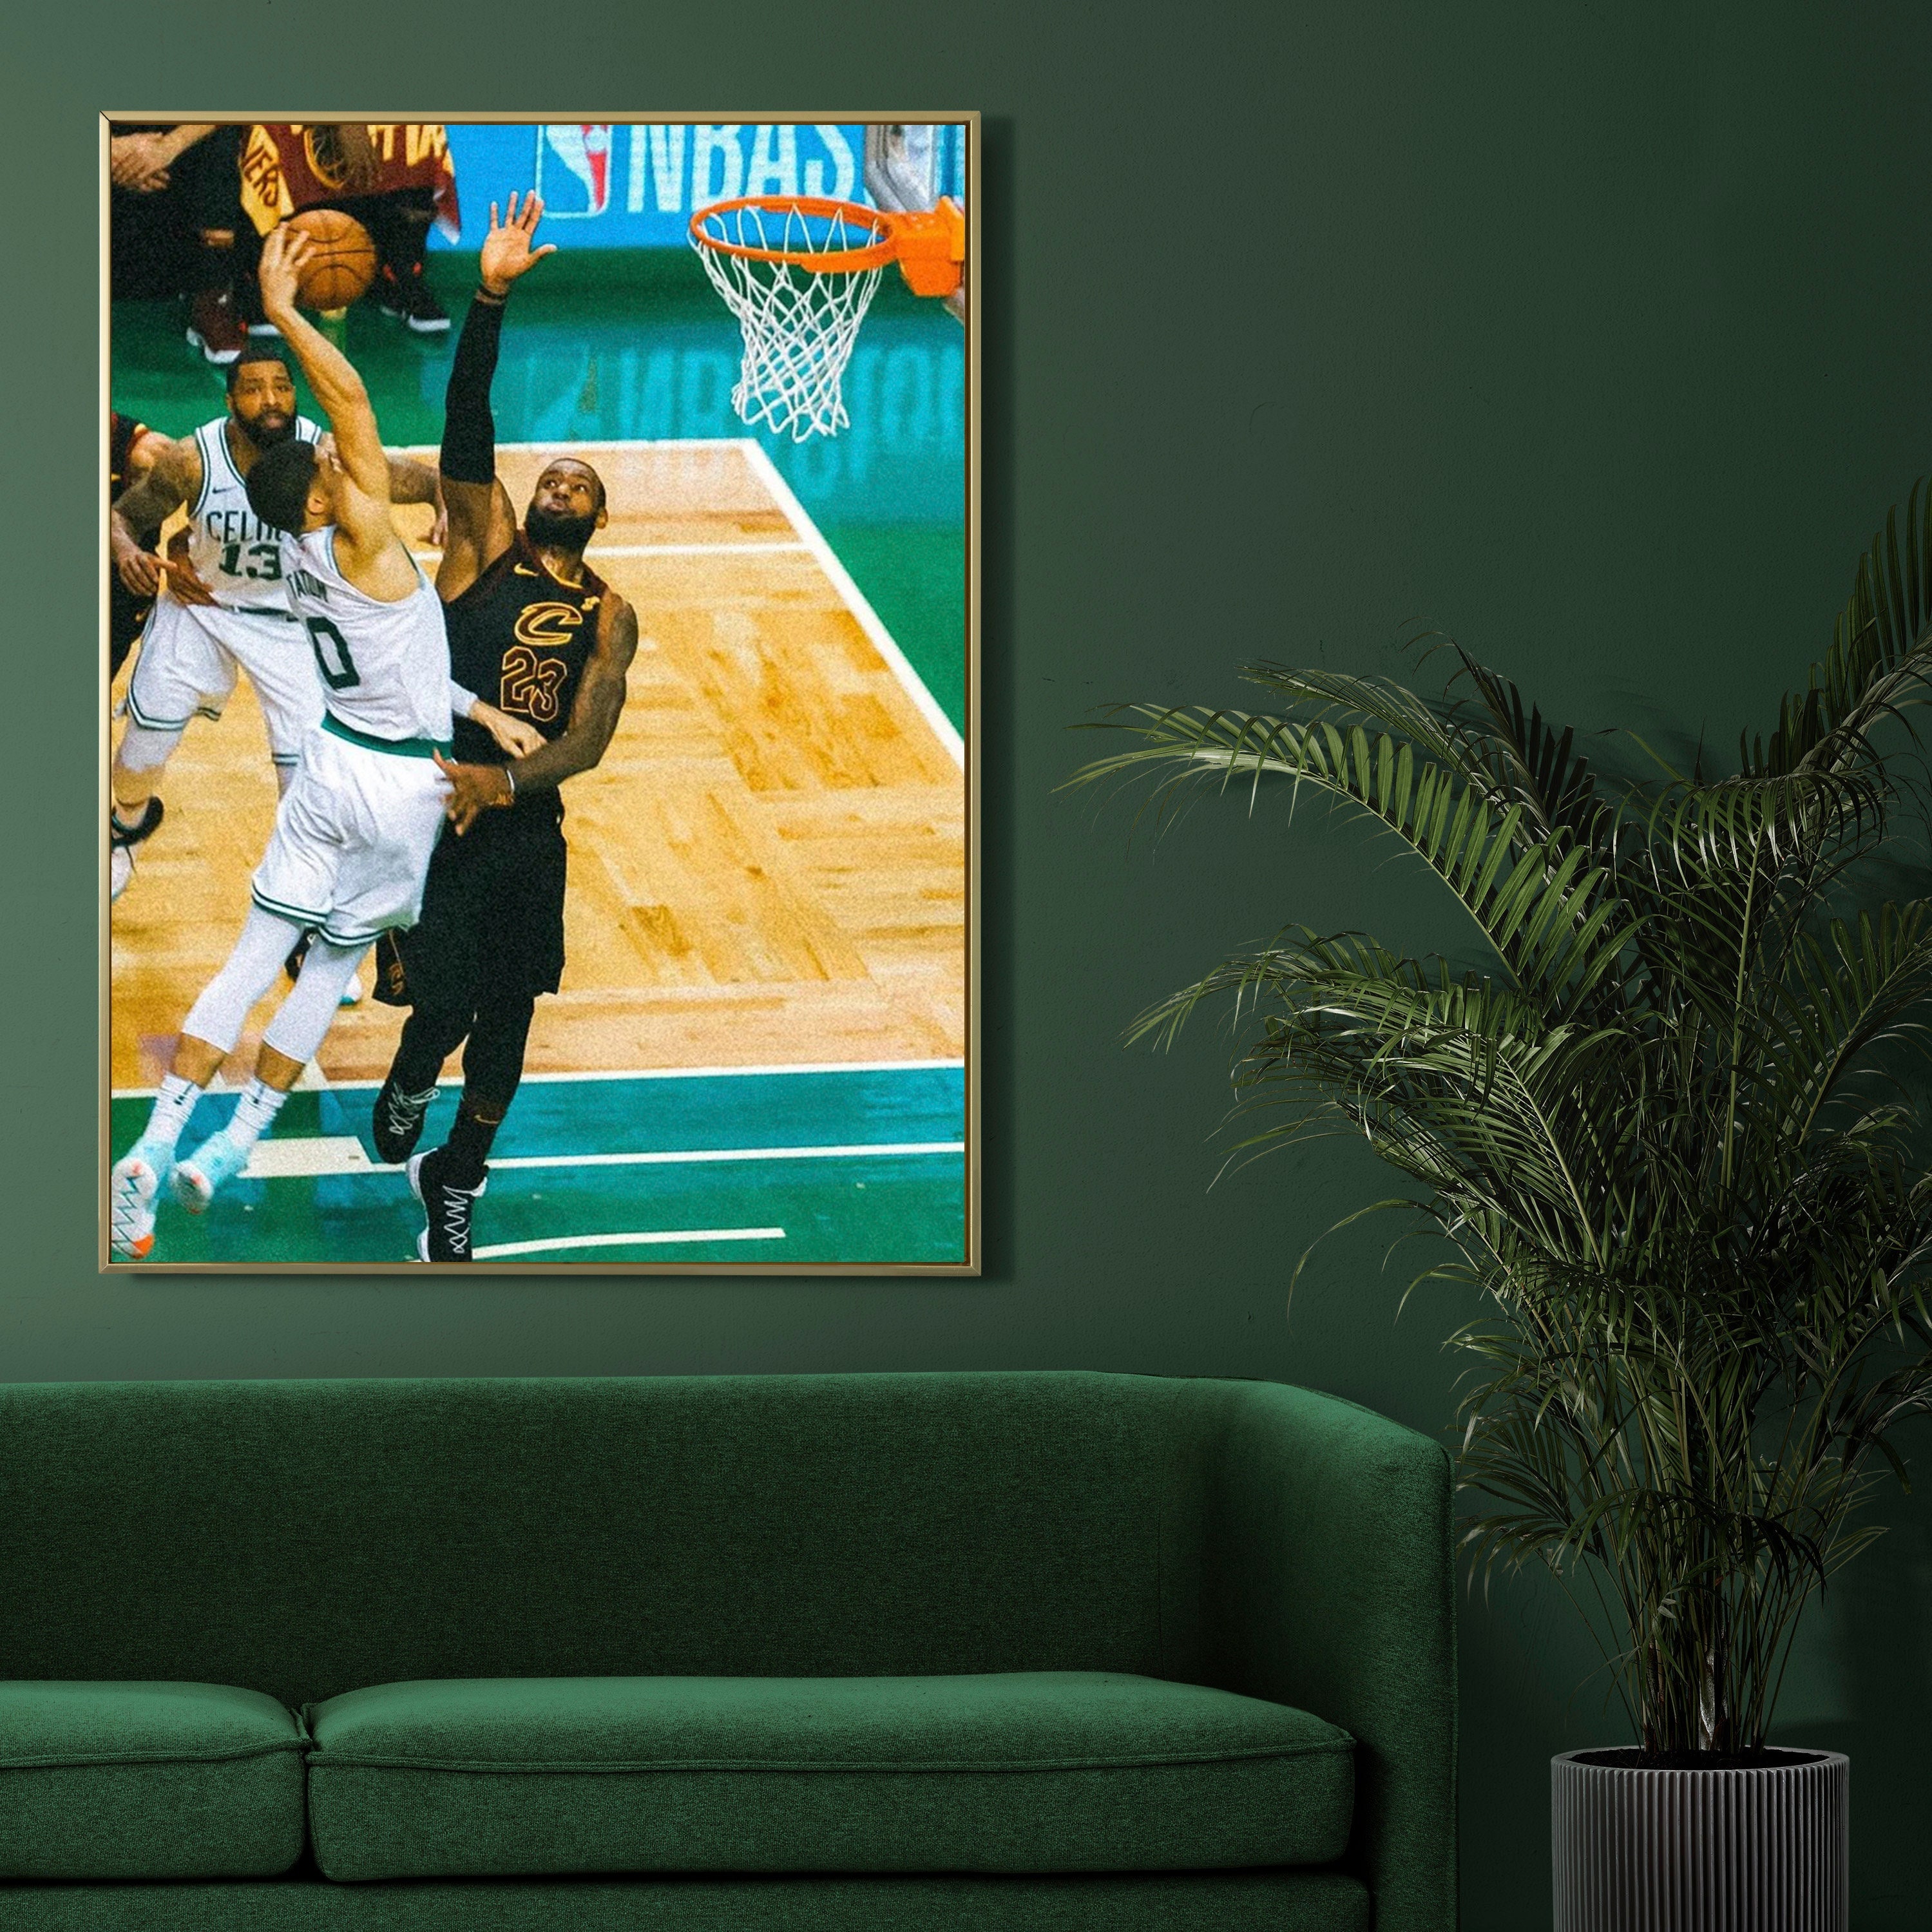 Boston Celtics Posters for Walls Jayson Tatum Jaylen Brown Marcus Smart  Poster Basketball Champion Wall Art Sports Superstar Poster Canvas for Home